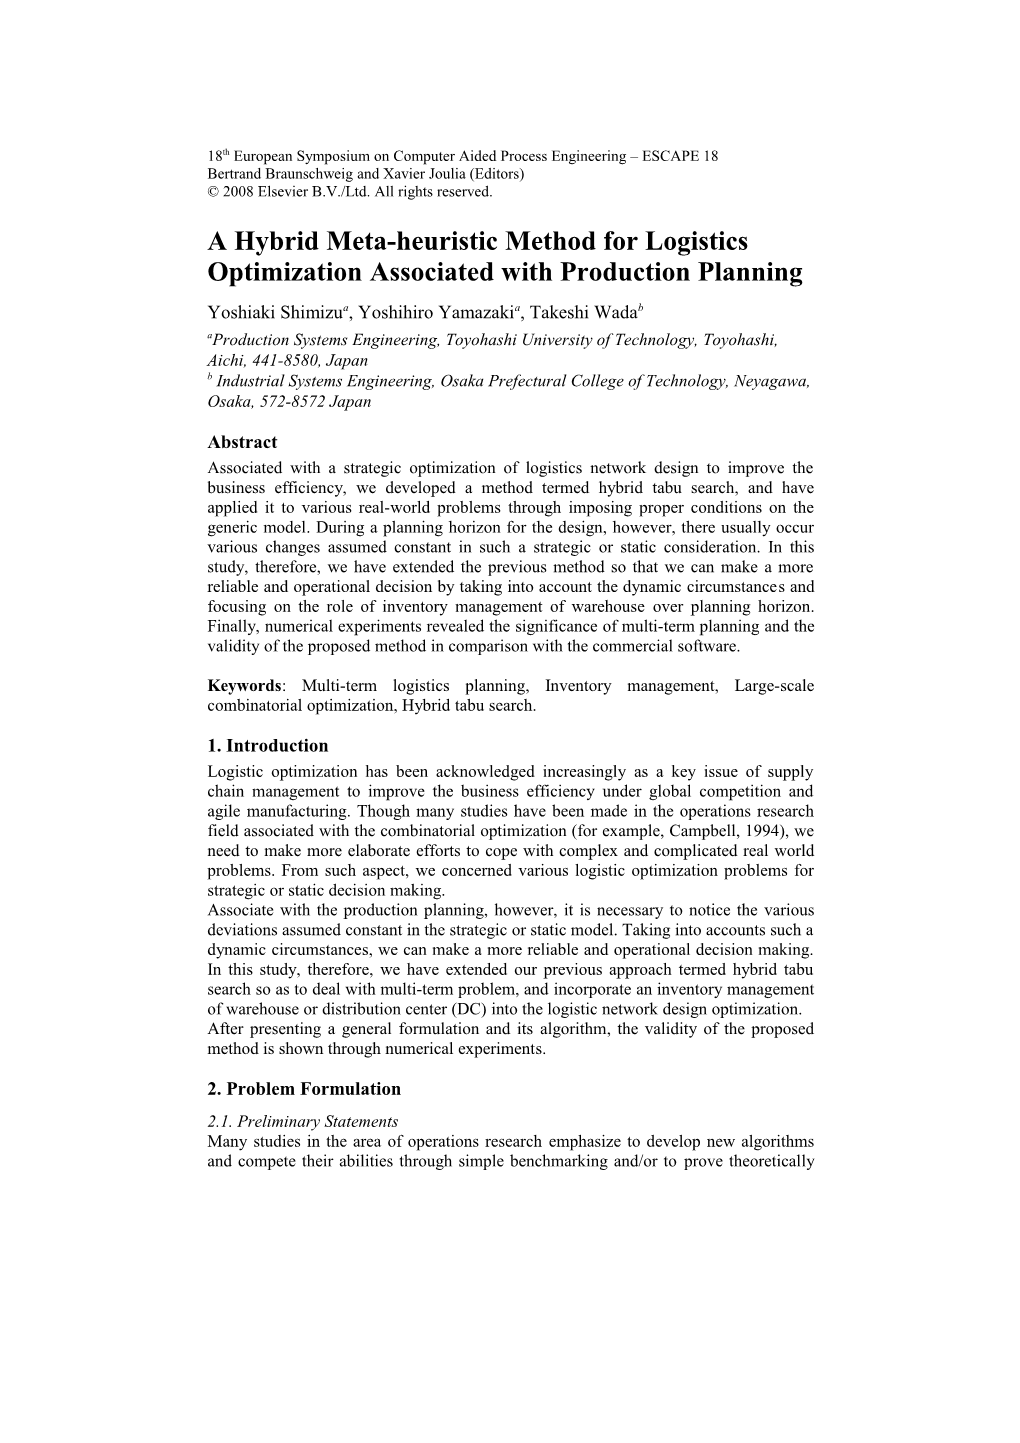 A Hybrid Meta-Heuristic Method for Logistics Optimization Associated with Production Planning